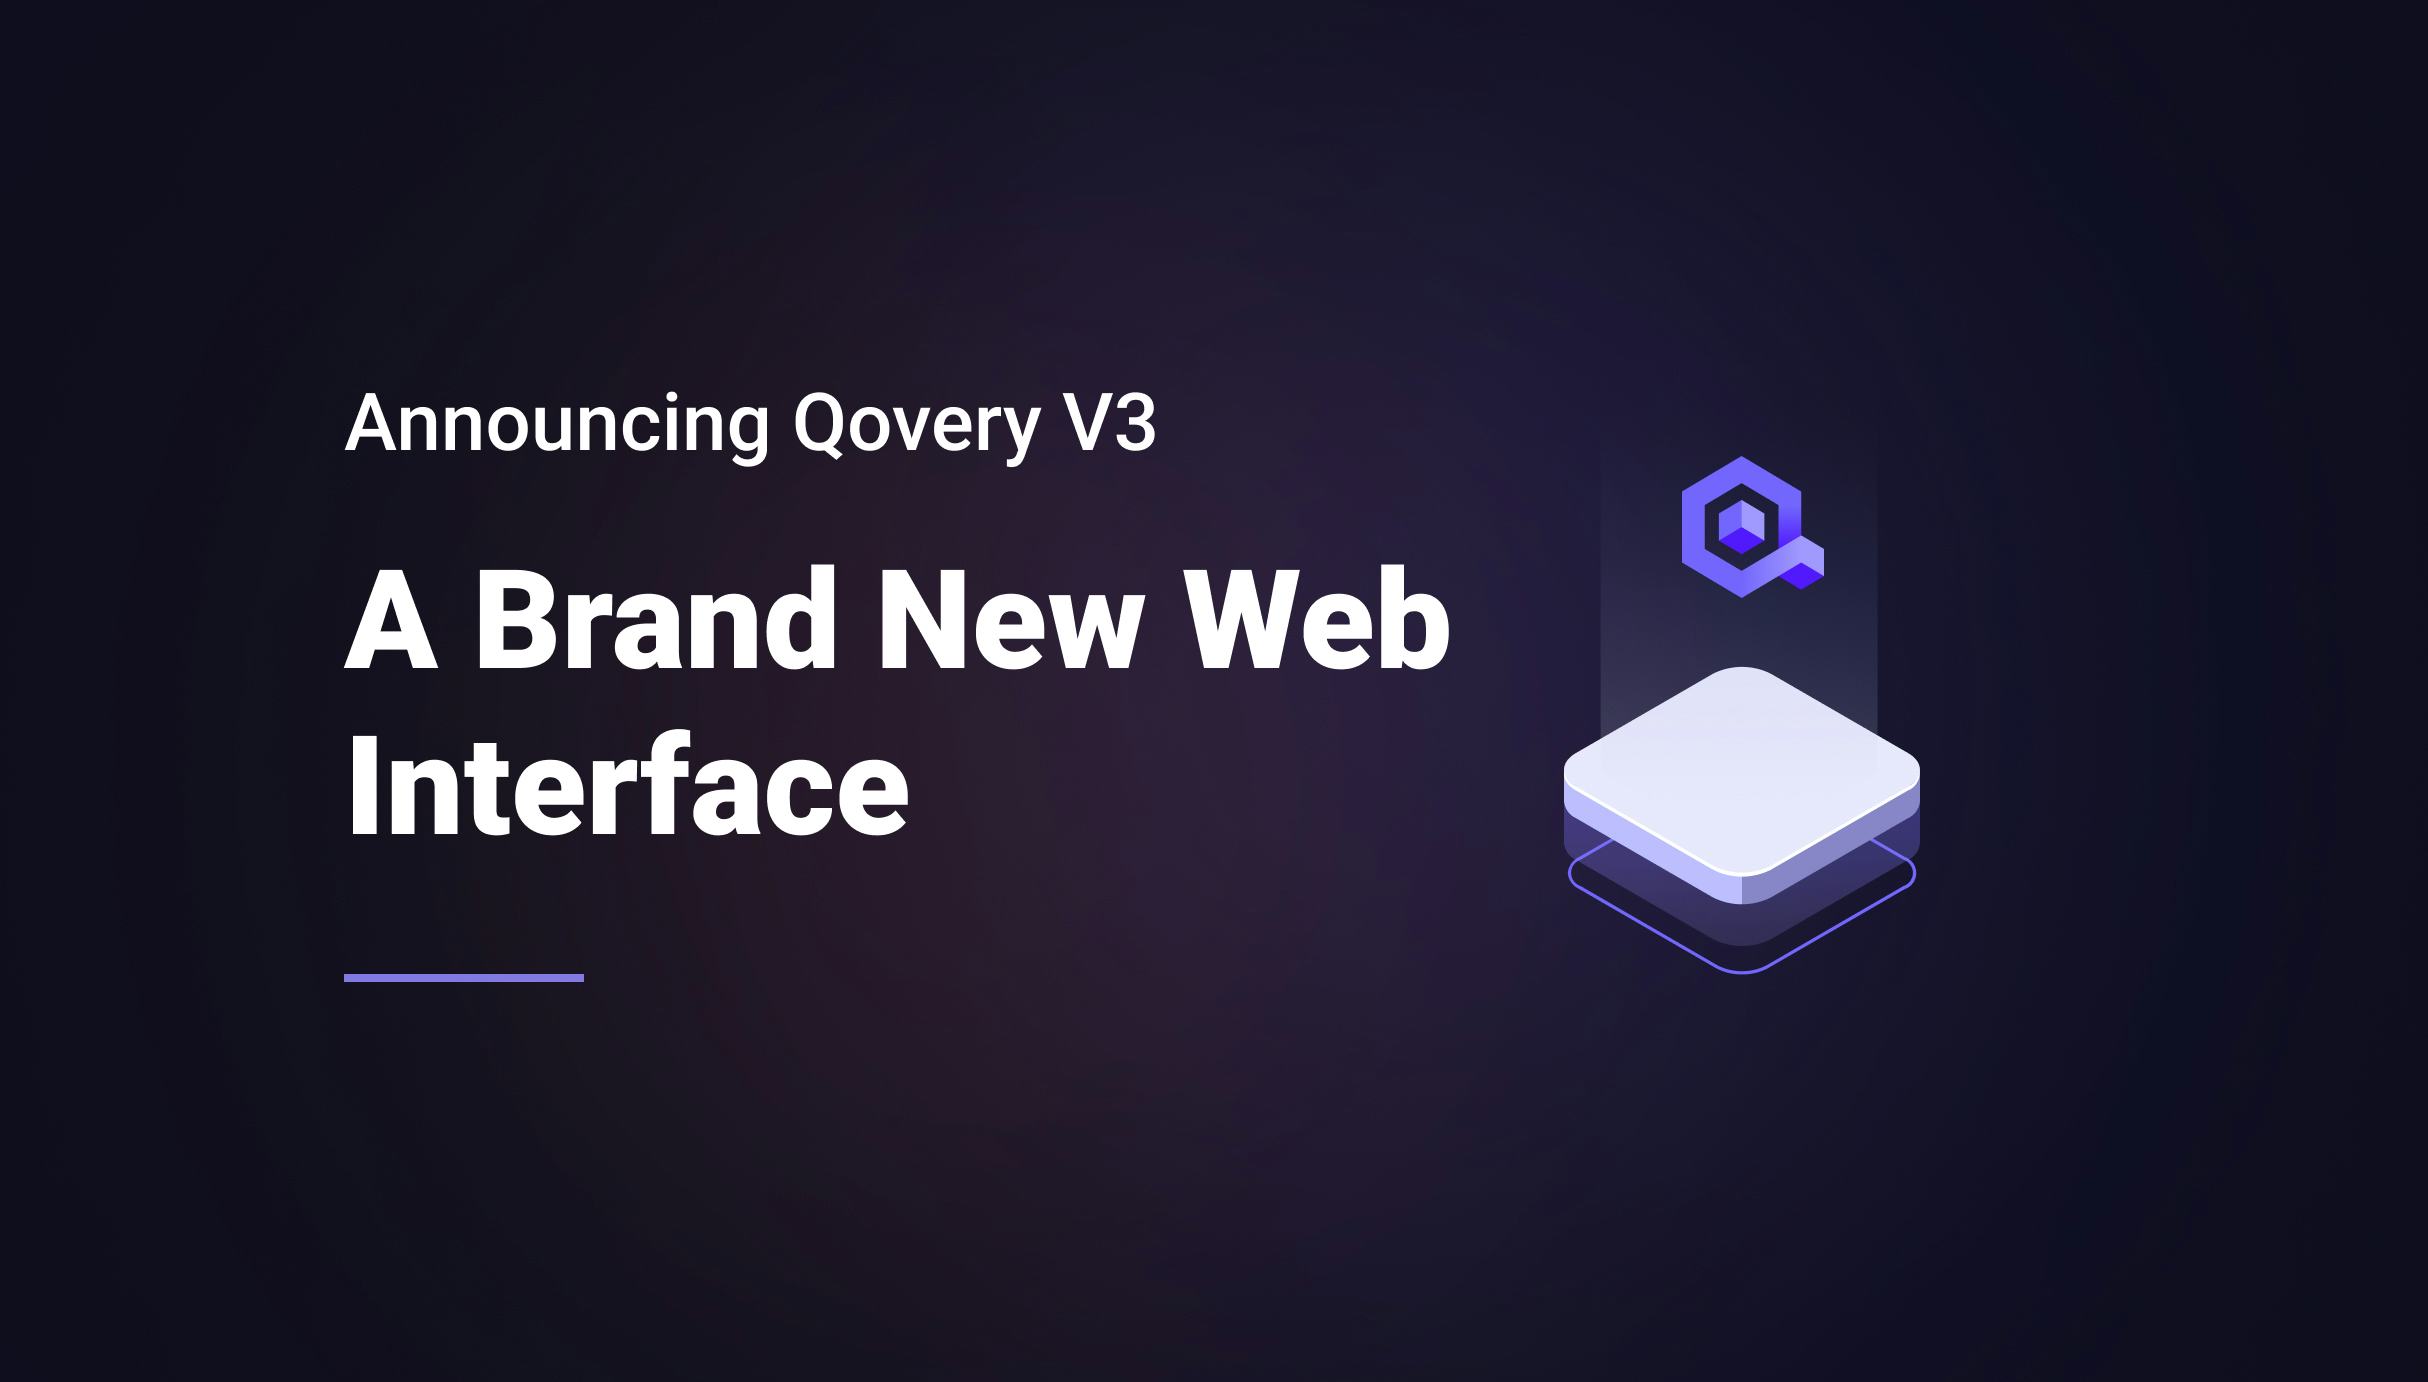 Announcing Qovery V3: A Brand New Web Interface